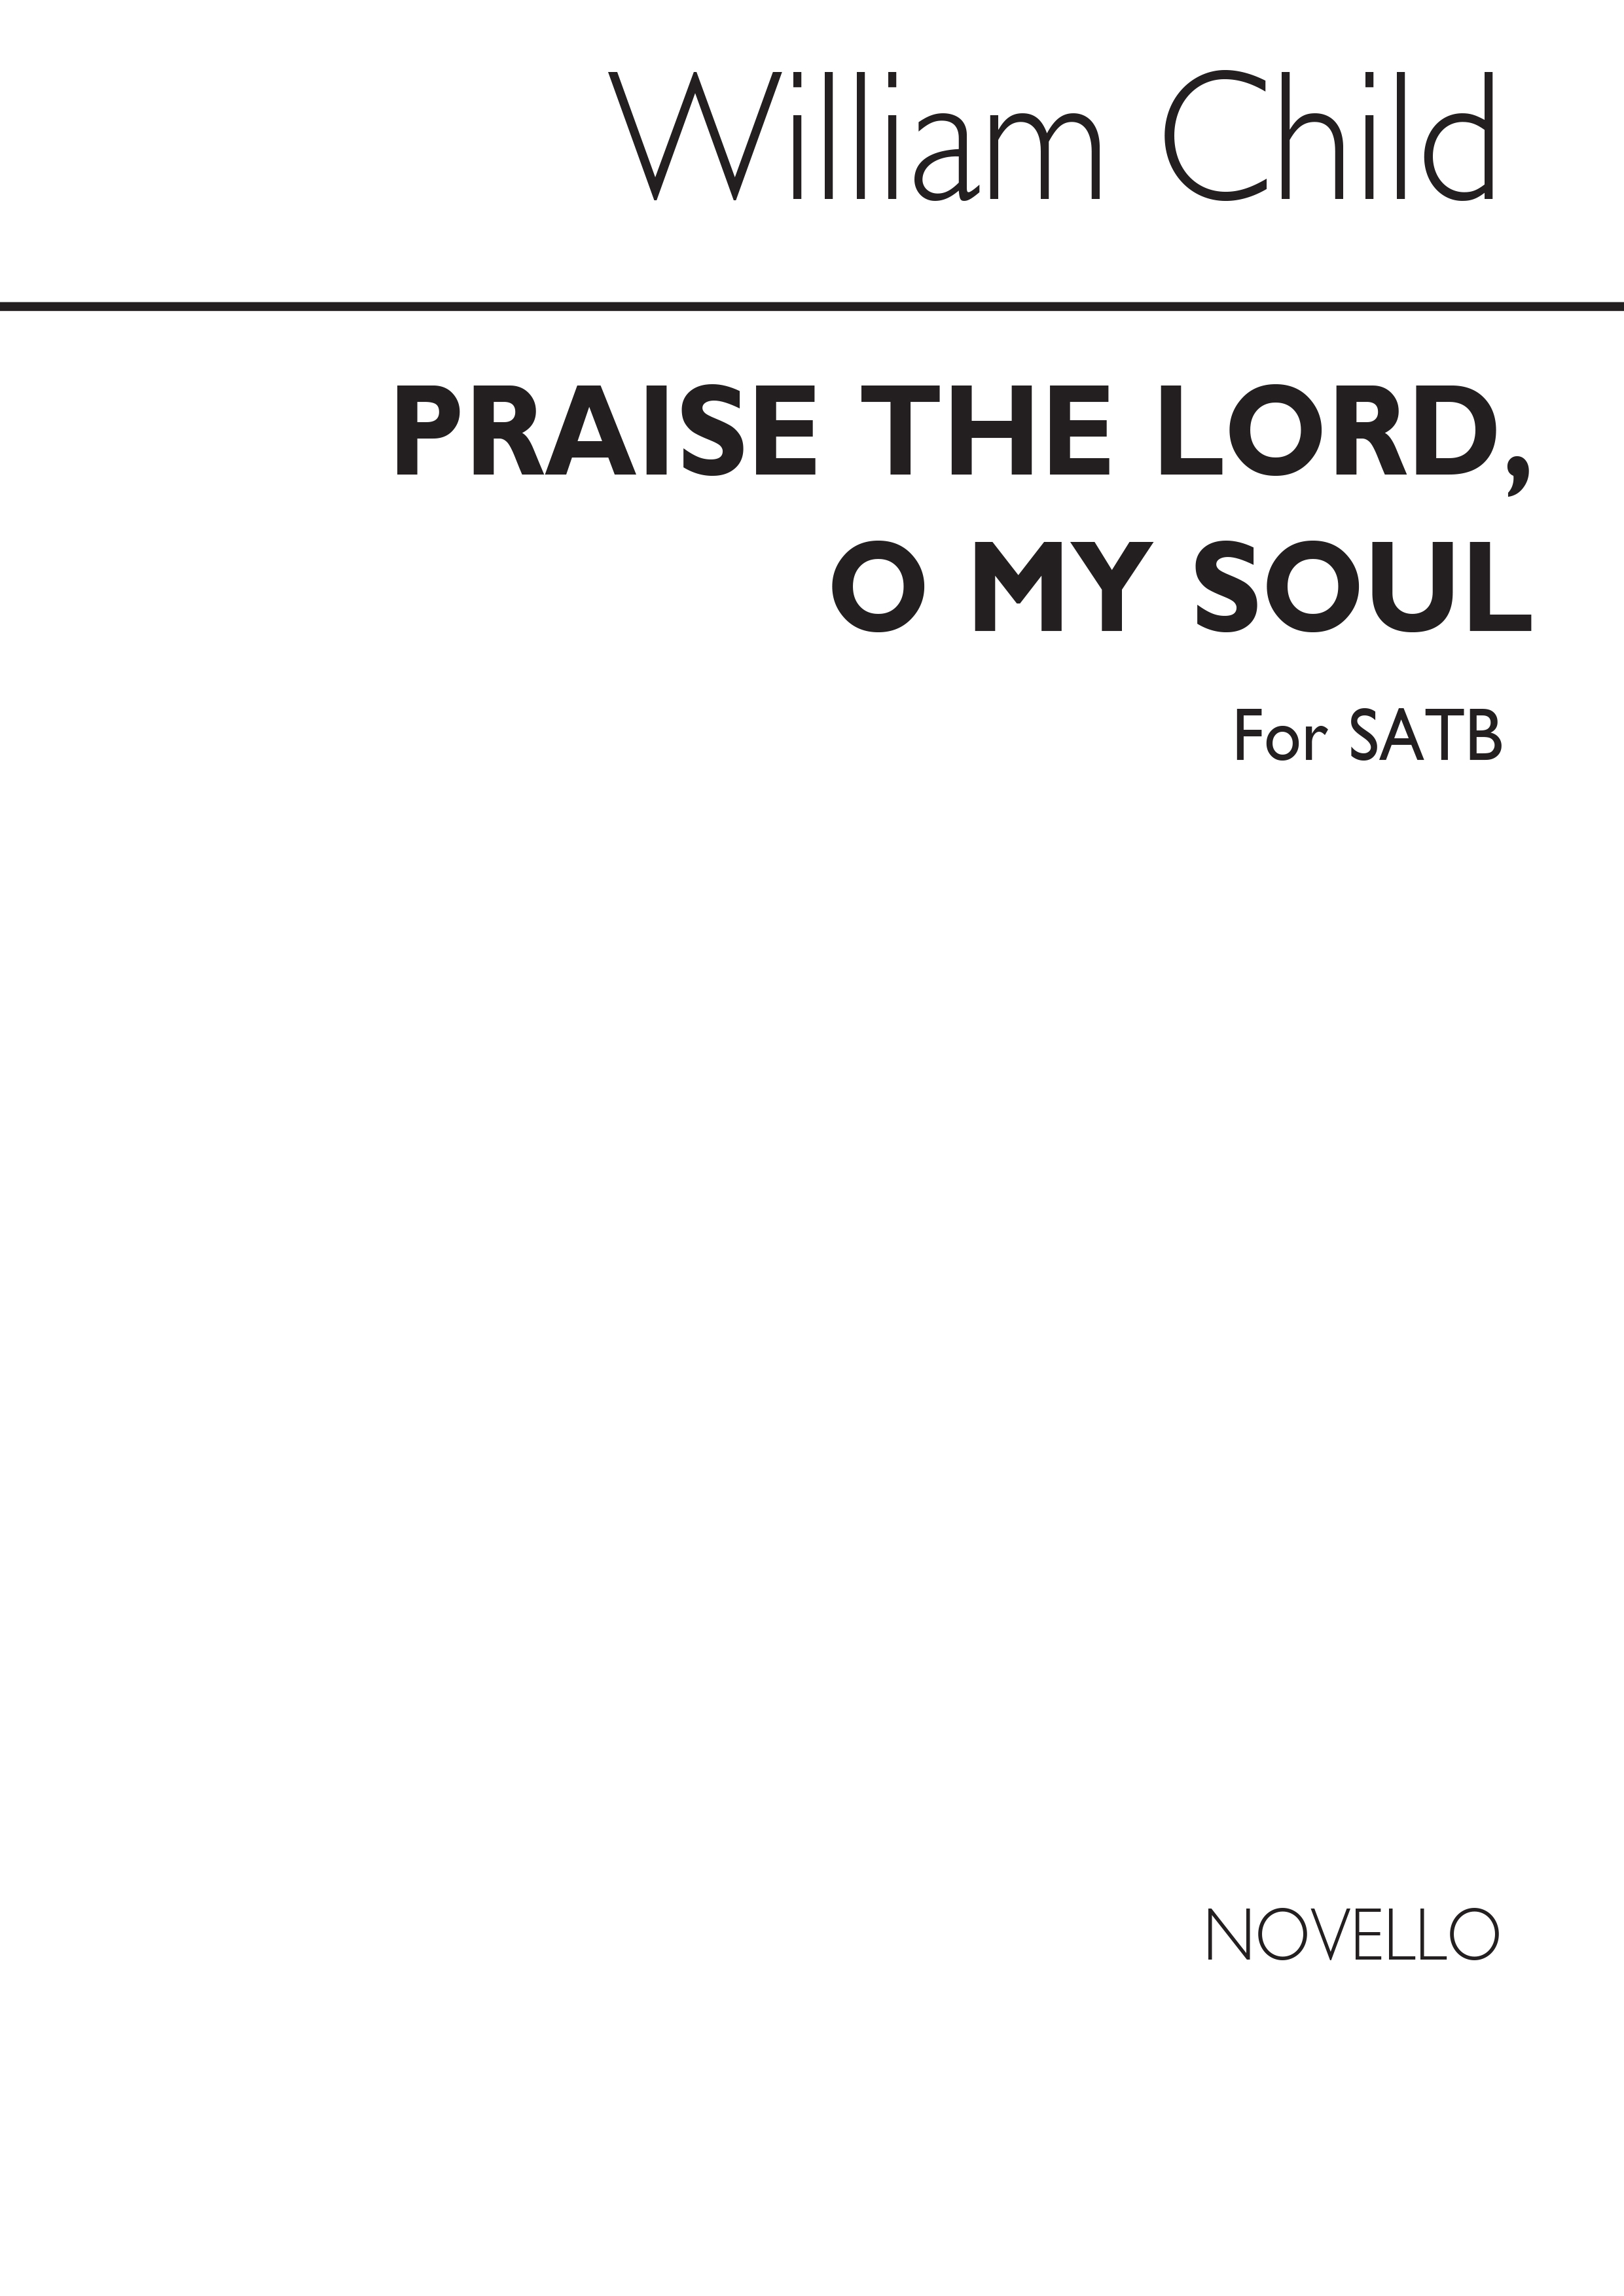 Child, Praise The Lord O My Soul Satb